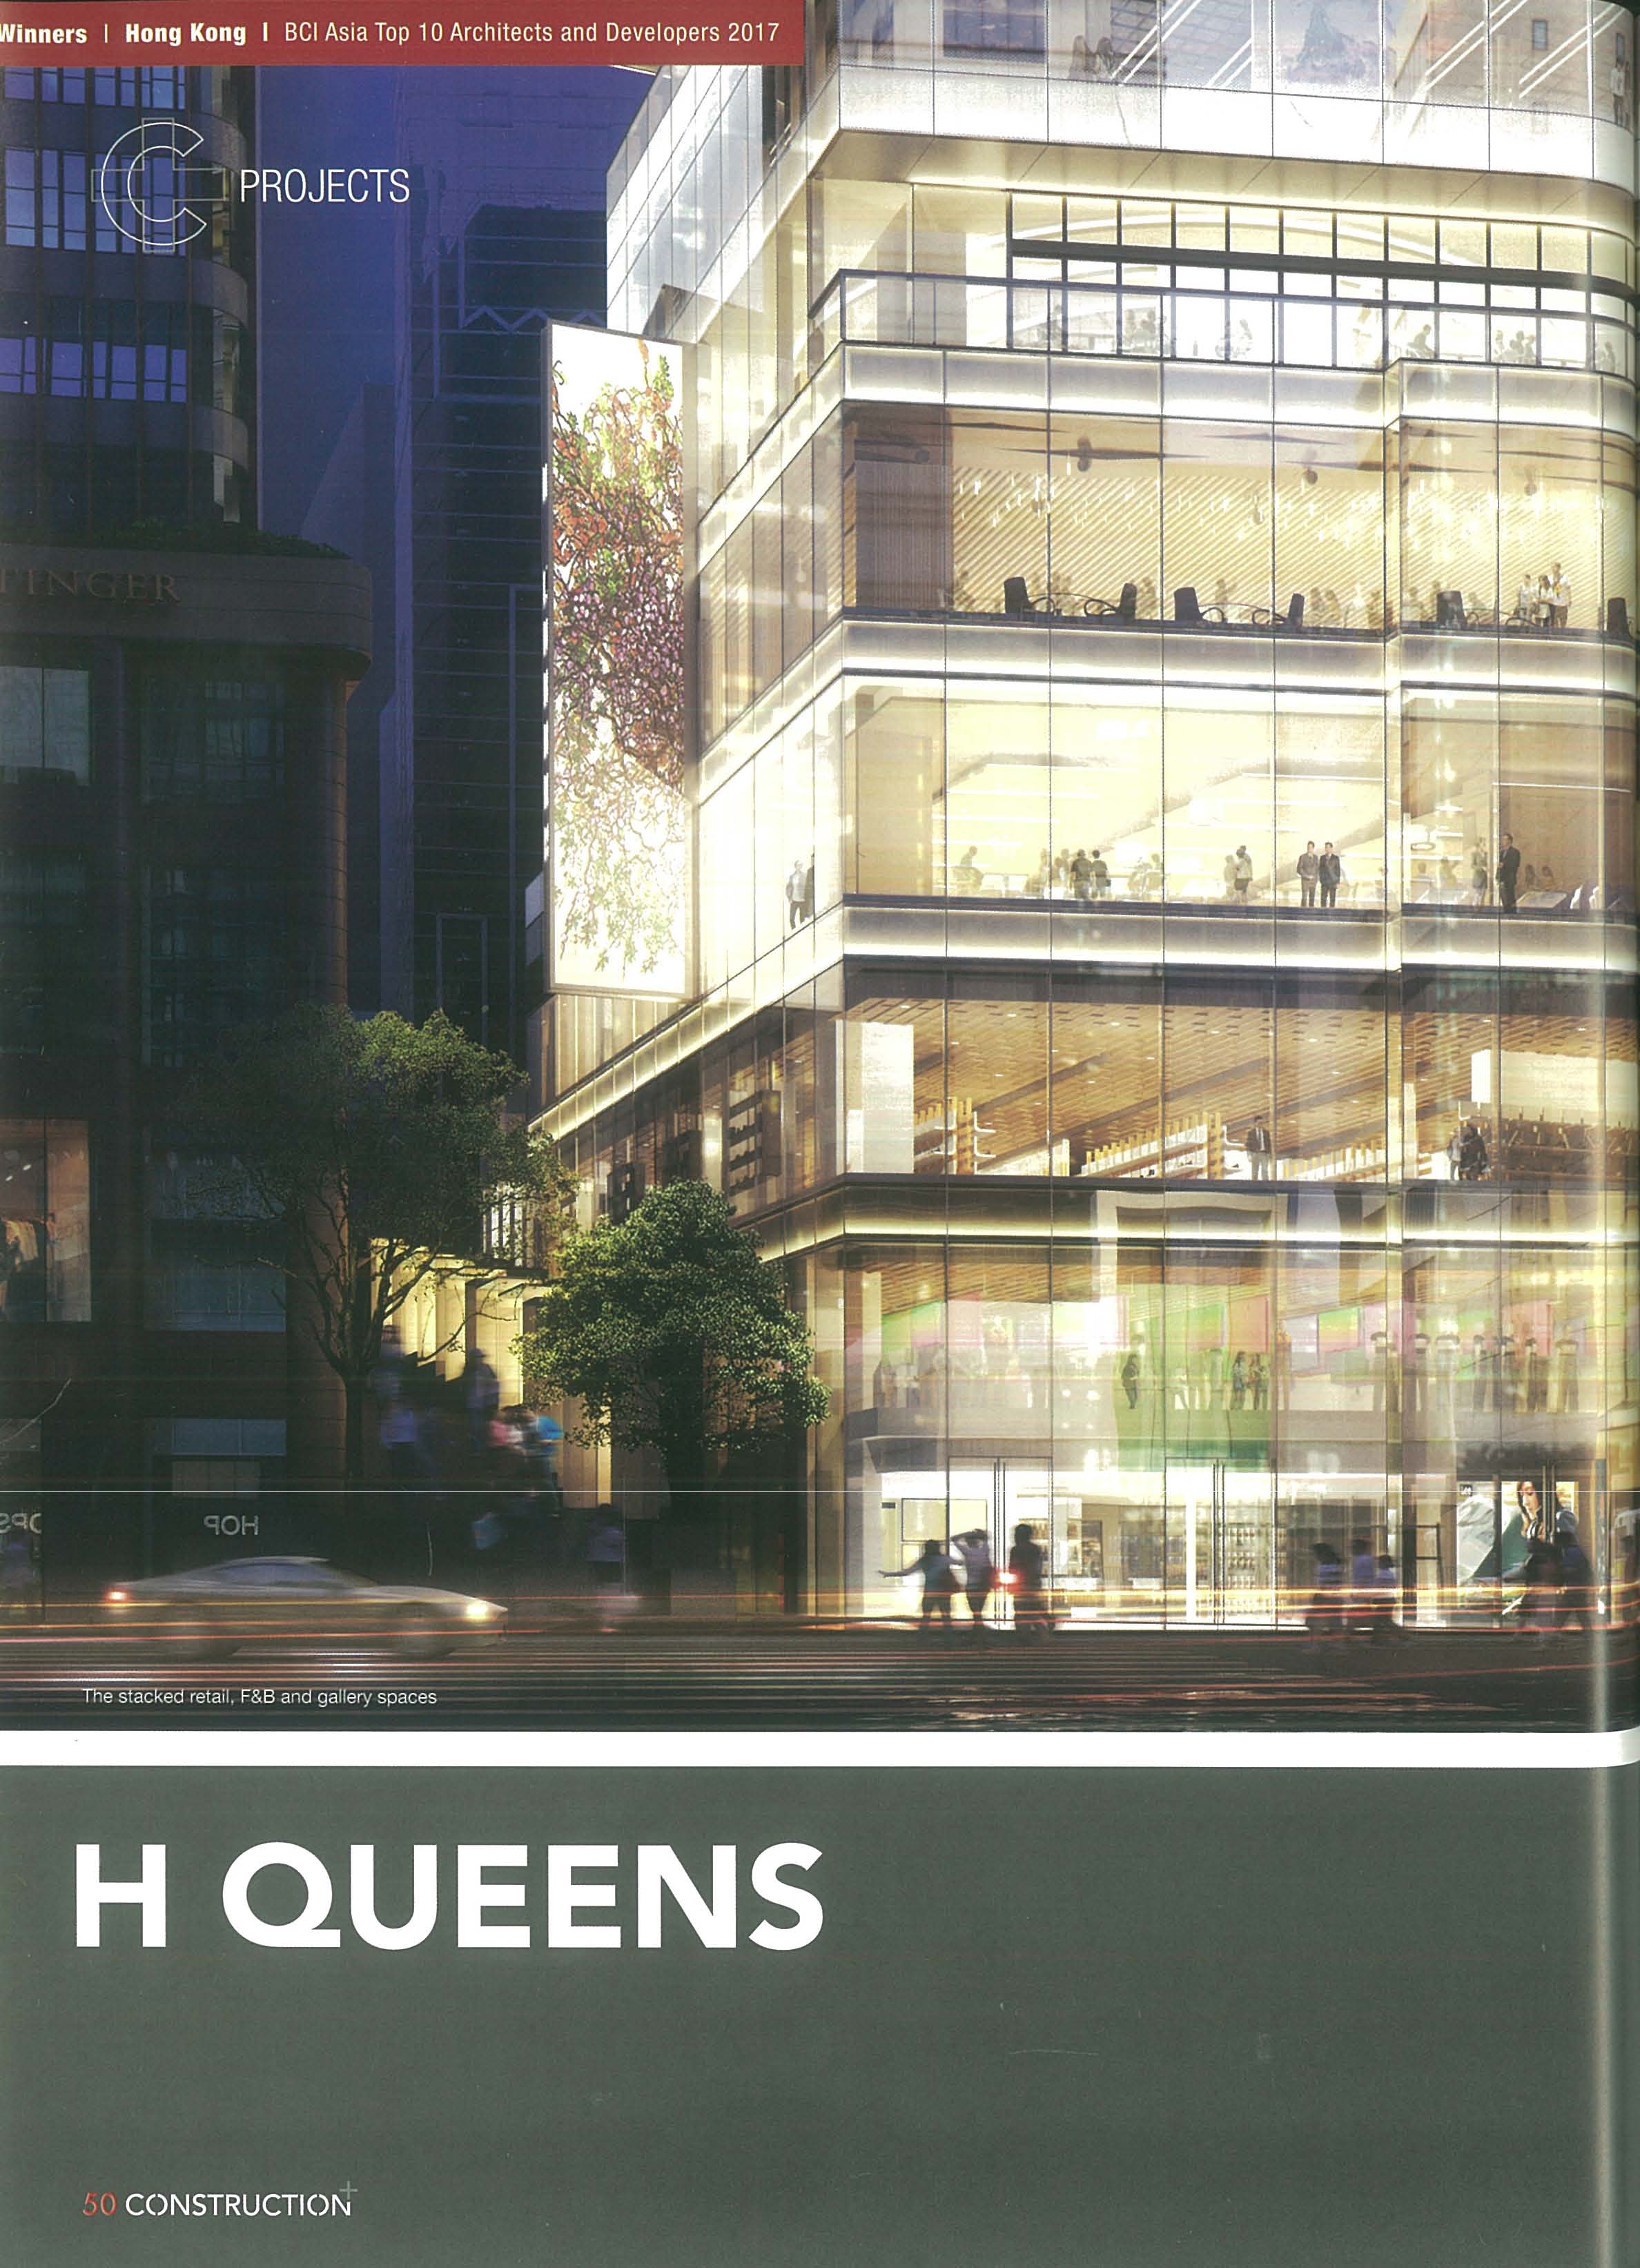 Construction+_Issue 7&8_Oct_Dec 2017_H Queens_Page_2.jpg